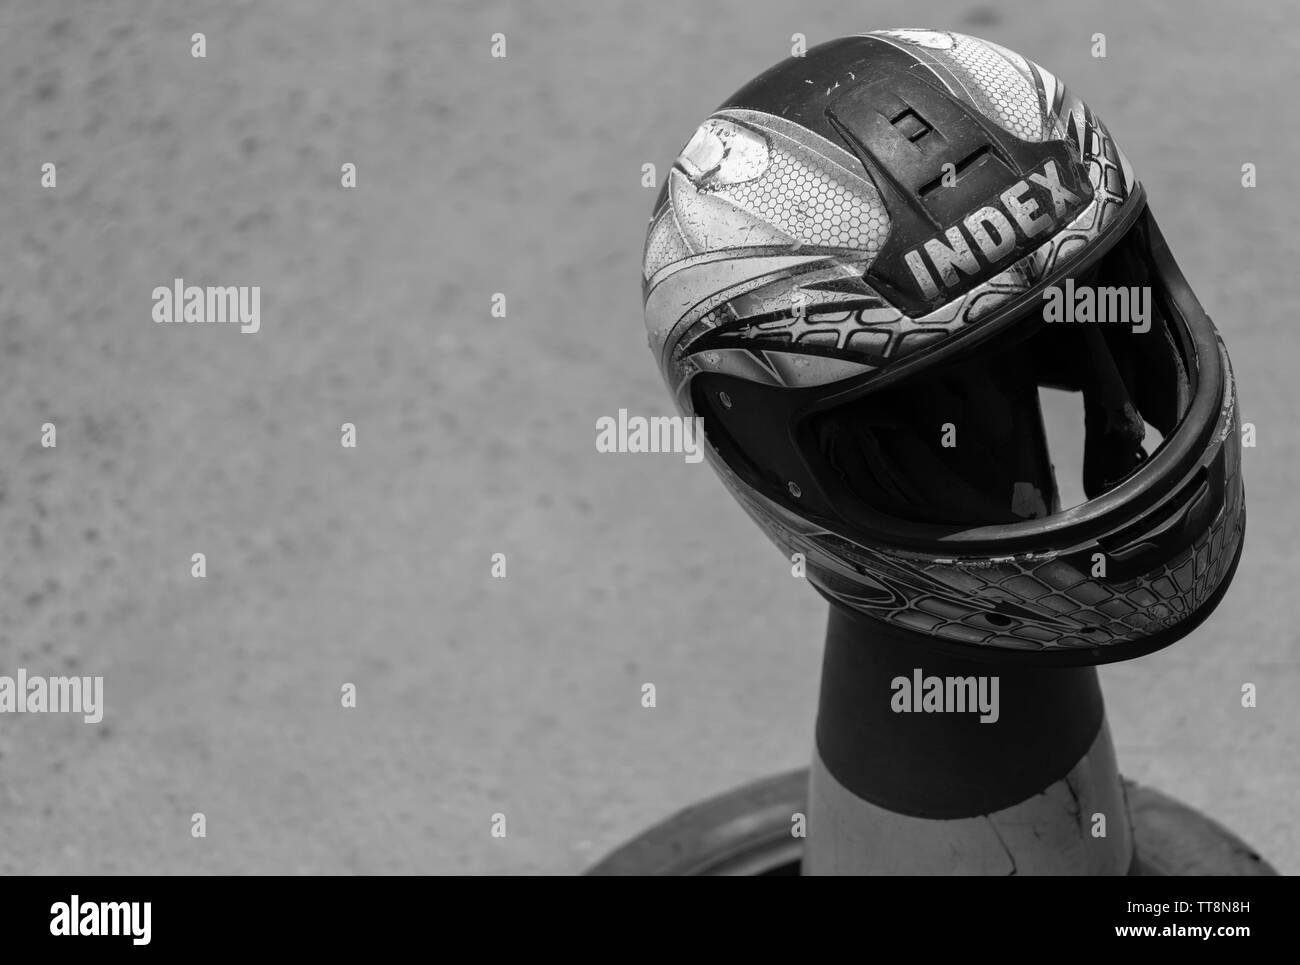 PATTAYA,THAILAND - APRIL 23,2019:Soi Buakhaow This is a popular helmet for  motorbike drivers.This one seems lost Stock Photo - Alamy